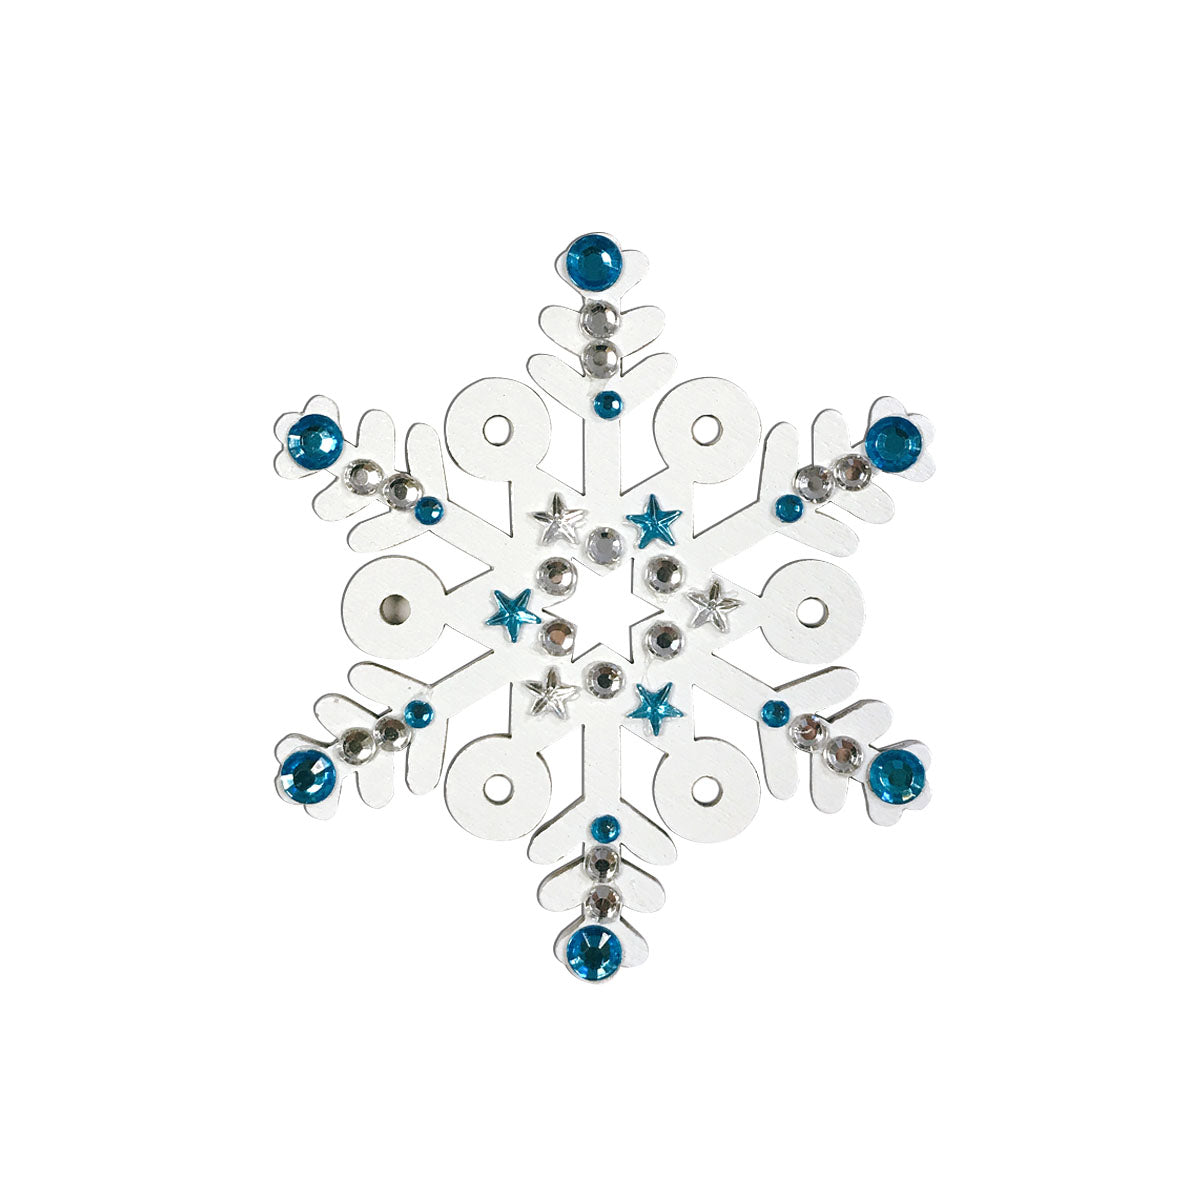 Wrapables Wooden Snowflake Hanging Ornament Christmas Decor (Set of 20)